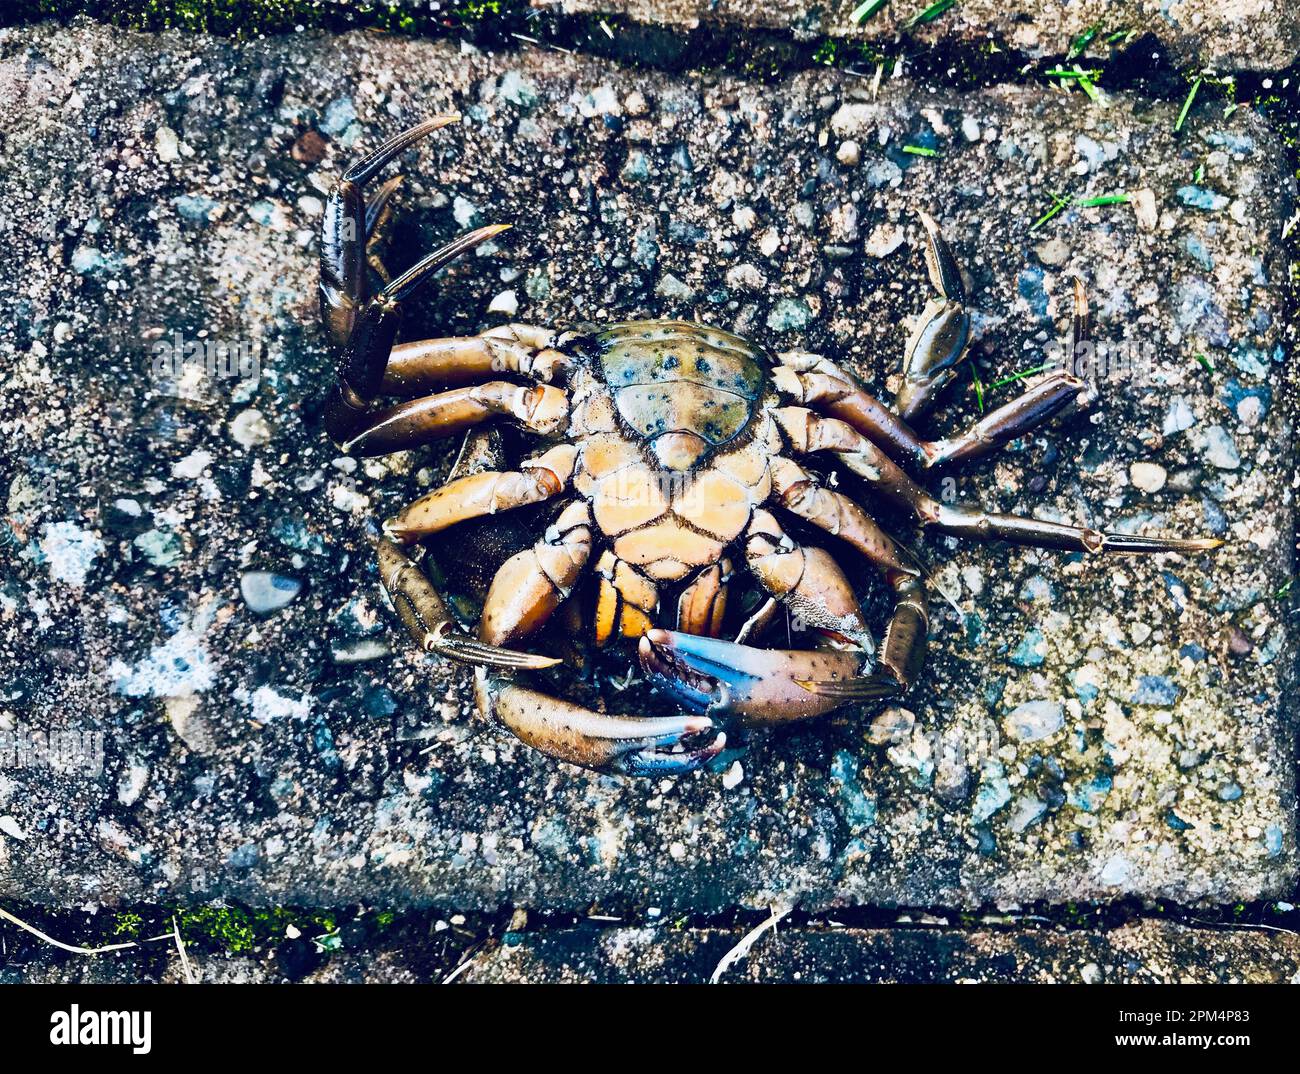 Dead, upturned velvet crab dropped by seagull onto garden path. Velvet (Necora puber) crabs are famously feisty and also known as the fighter crab. Stock Photo